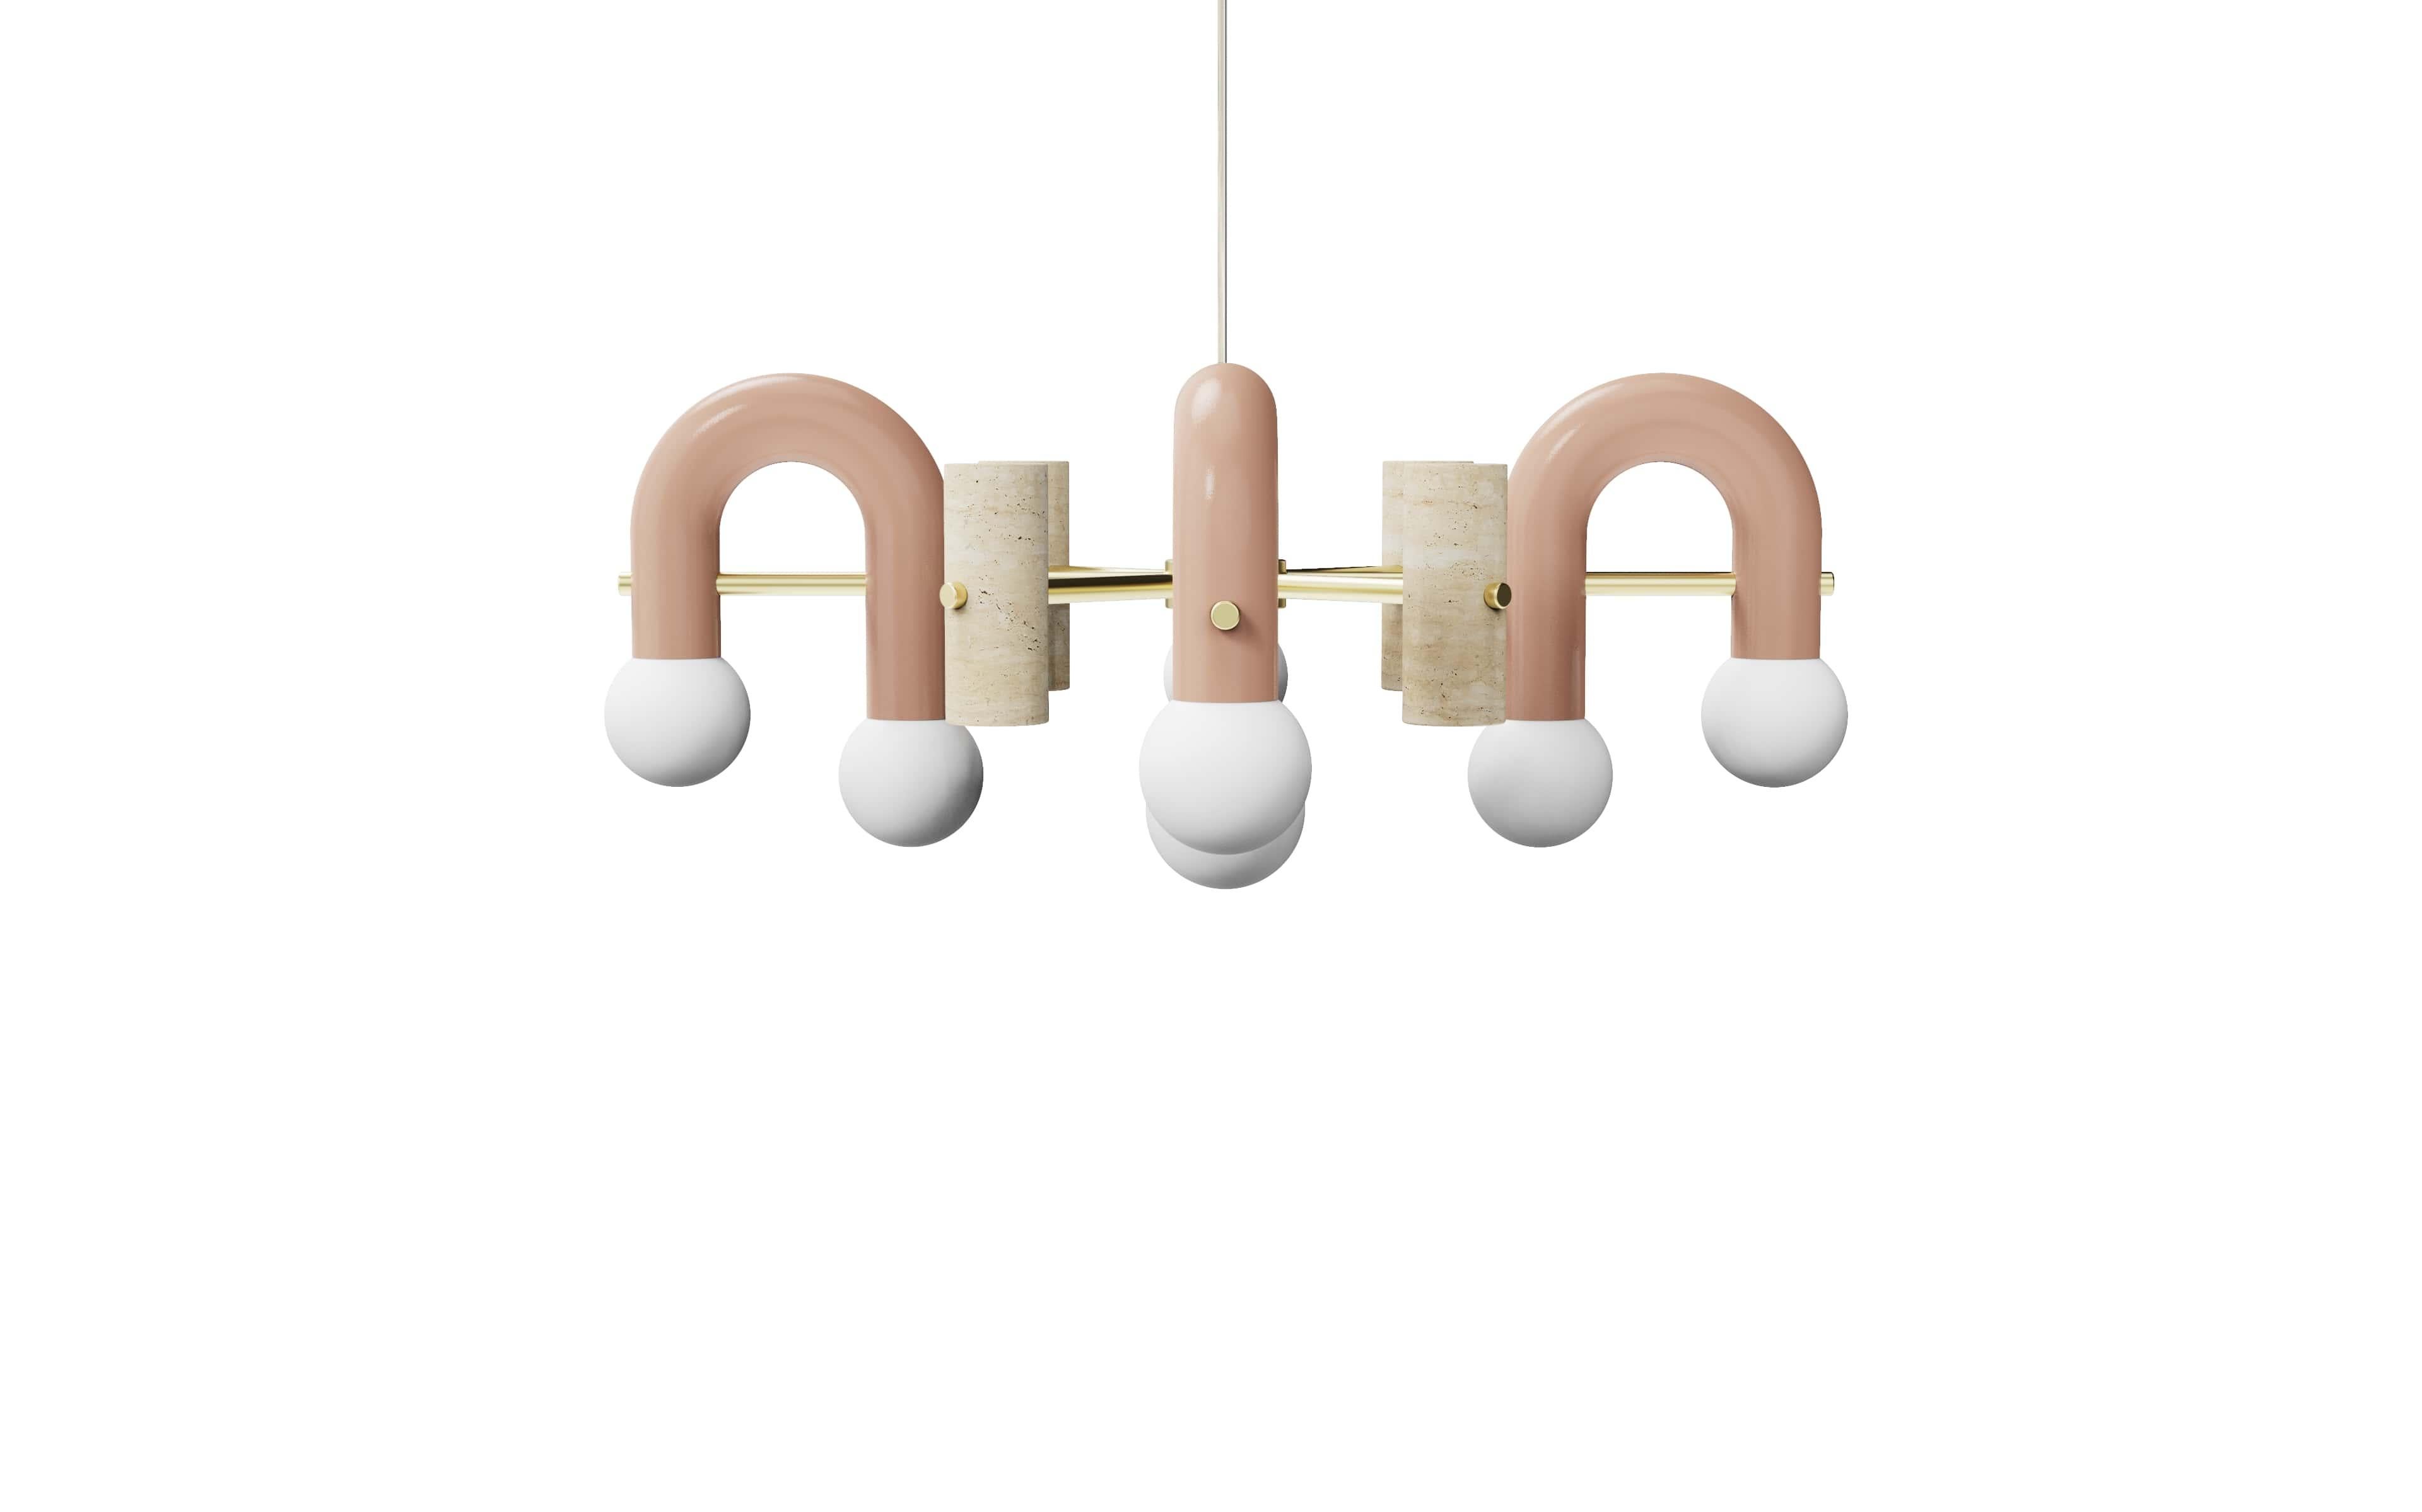 Pyppe suspension lamp 100 by Dooq
Dimensions: 36 x 100 x 100 cm
Materials: Lacquered metal, brass, nickel/copper, travertine

All our lamps can be wired according to each country. If sold to the USA it will be wired for the USA for